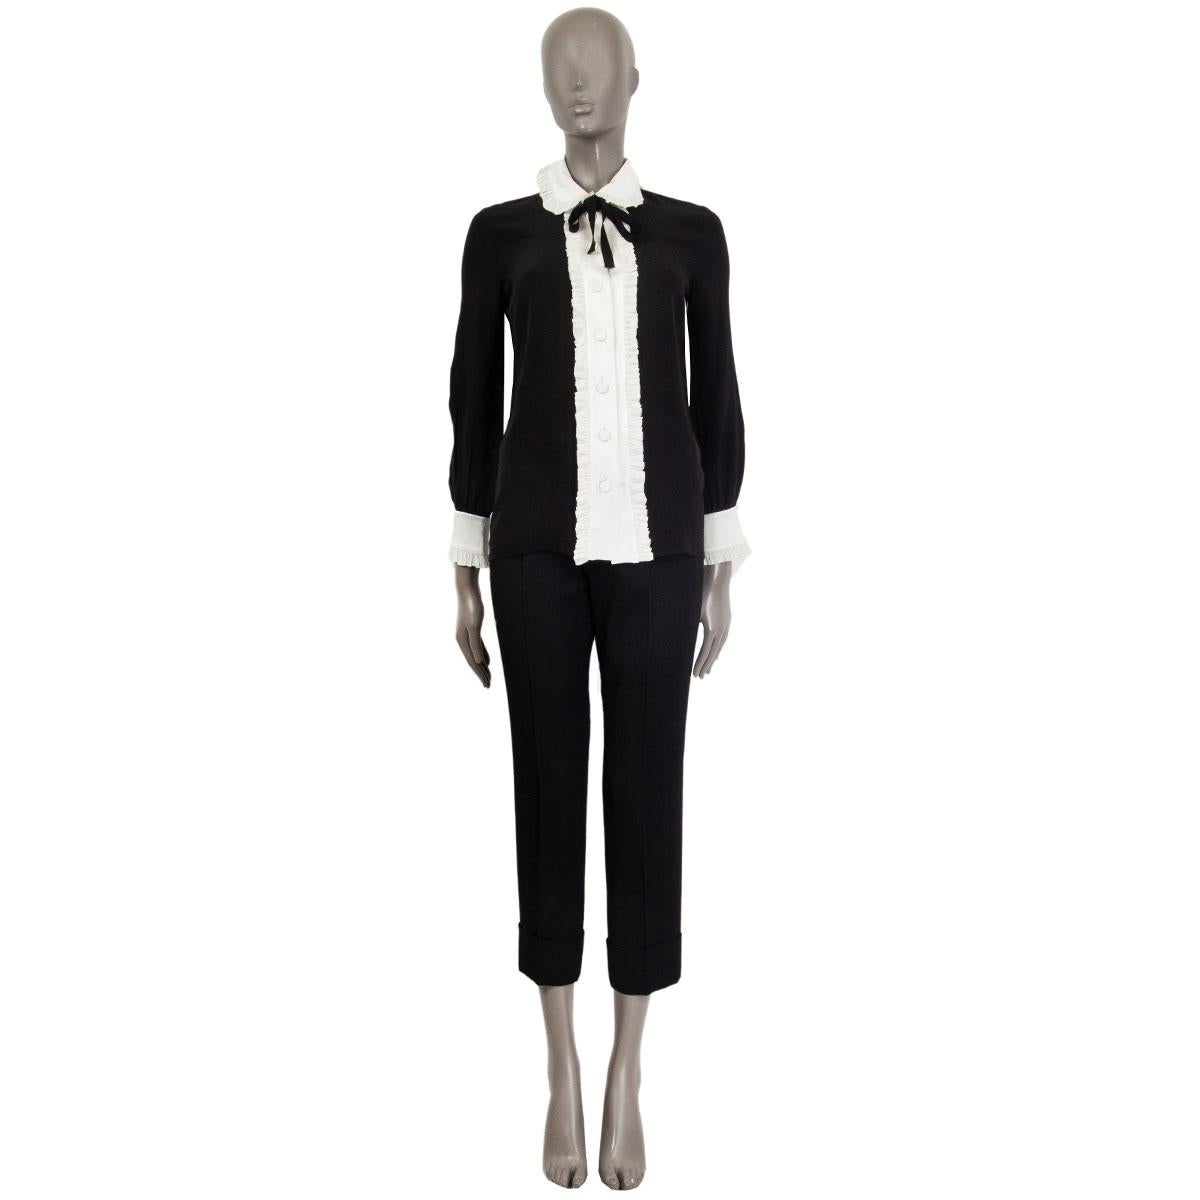 100% authentic Gucci ruffled blouse in black&white silk (missing content tag) with a black ribbon at the neck-line. Closes with eight buttons on the front and has ruffles on the collar-hem, along the front and on the cuffs-hem. Unlined. Has been